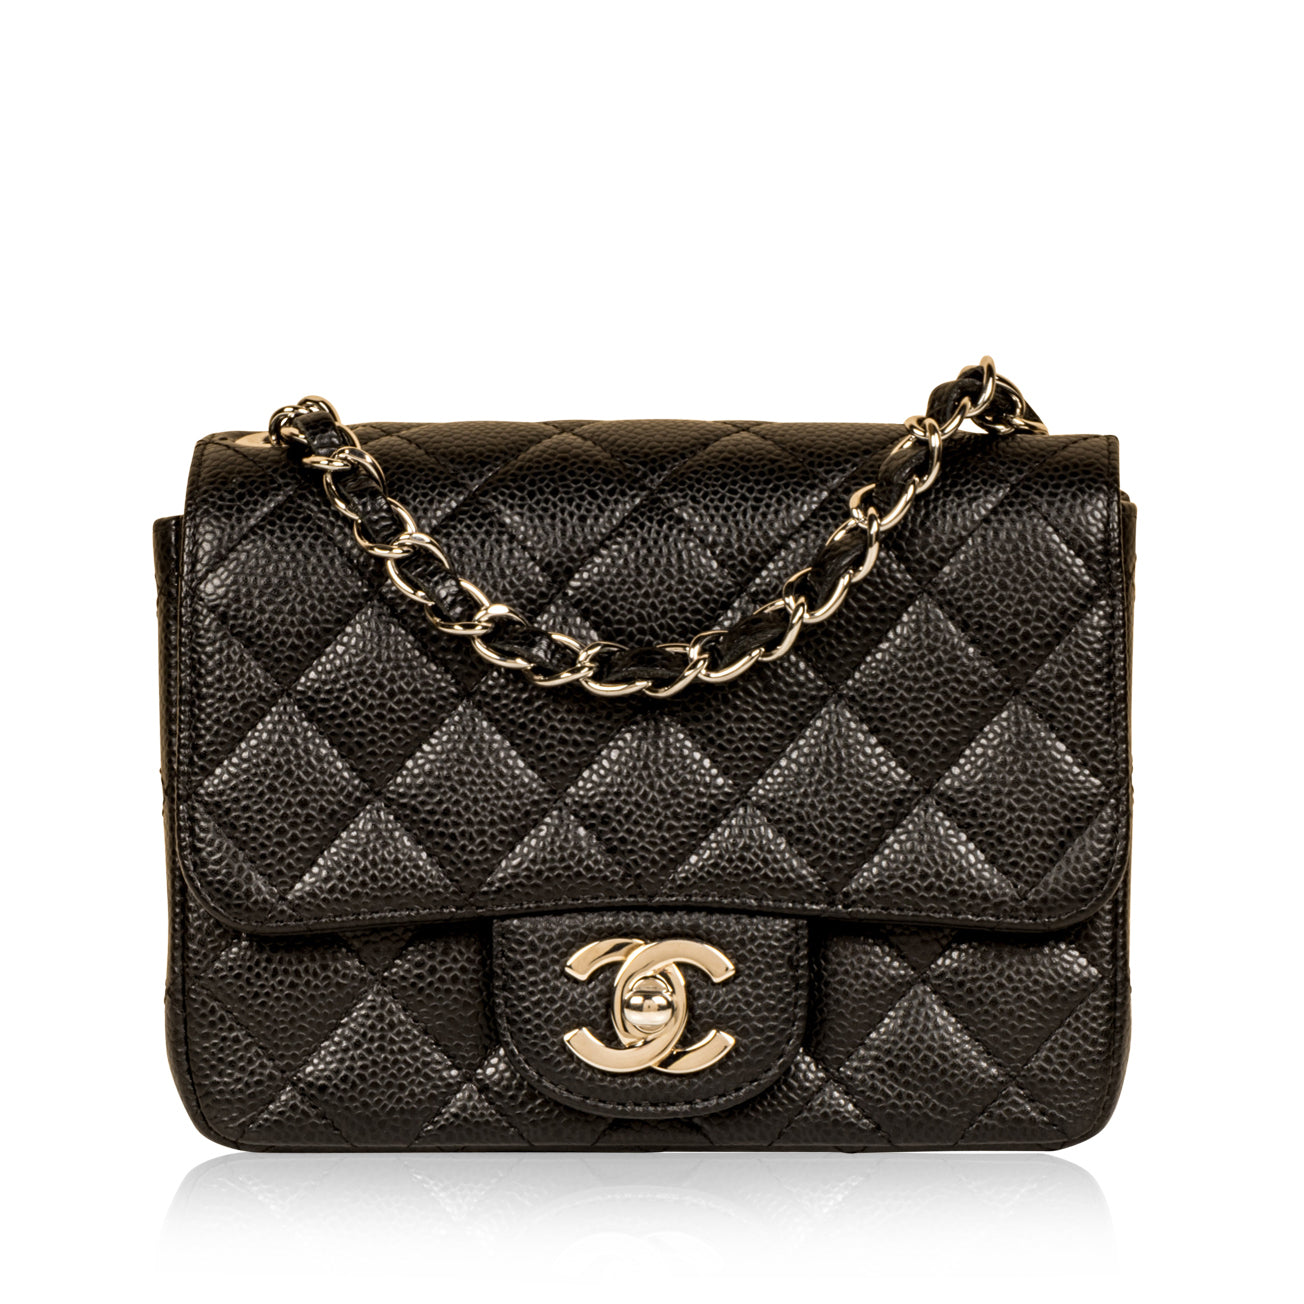 Chanel Mini Flap Bag Black in Lambskin Leather with Goldtone  US